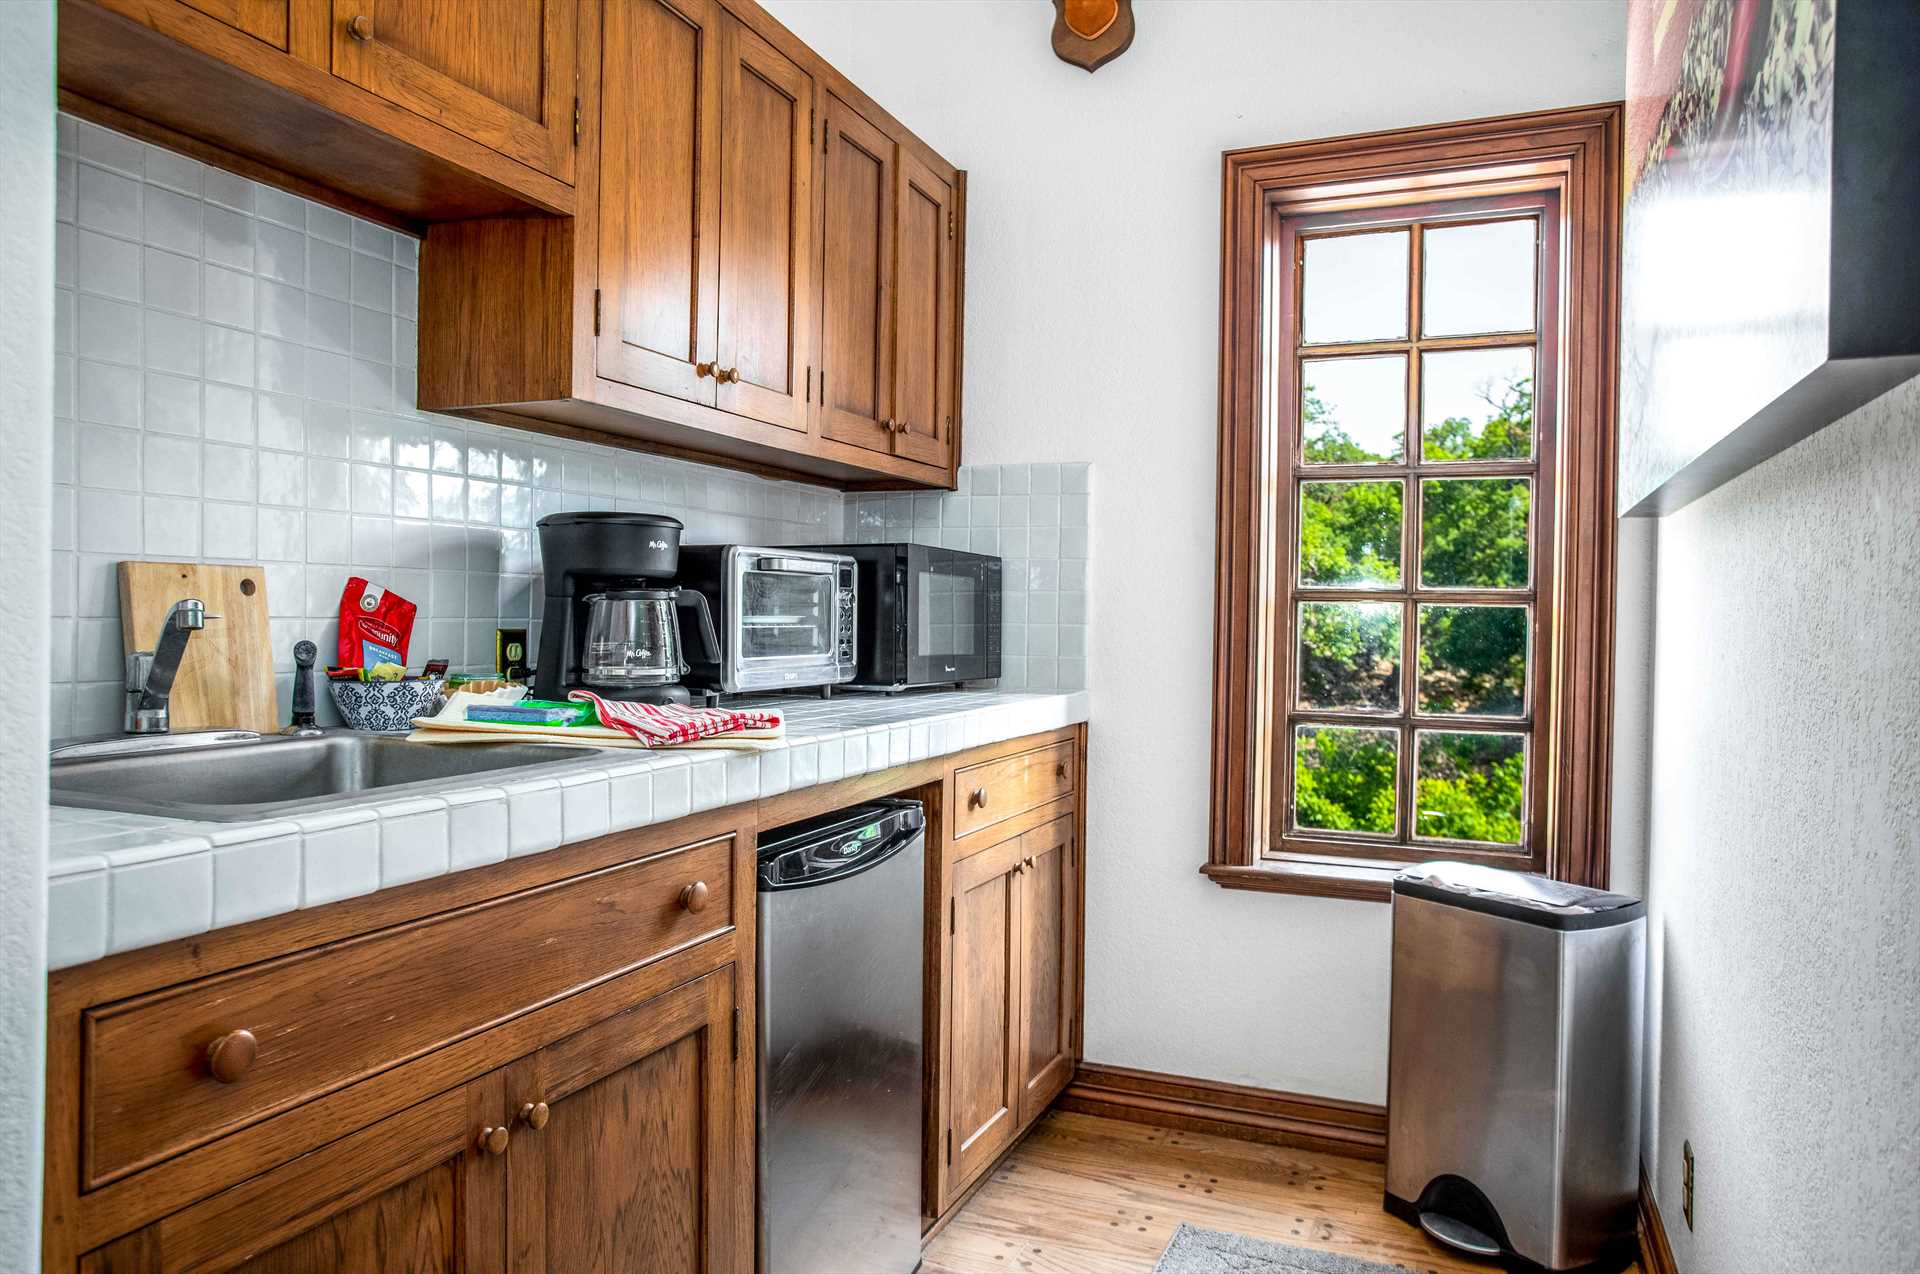                                                 There's a fridge, microwave, toaster, and coffee maker in the cozy Casita kitchenette.